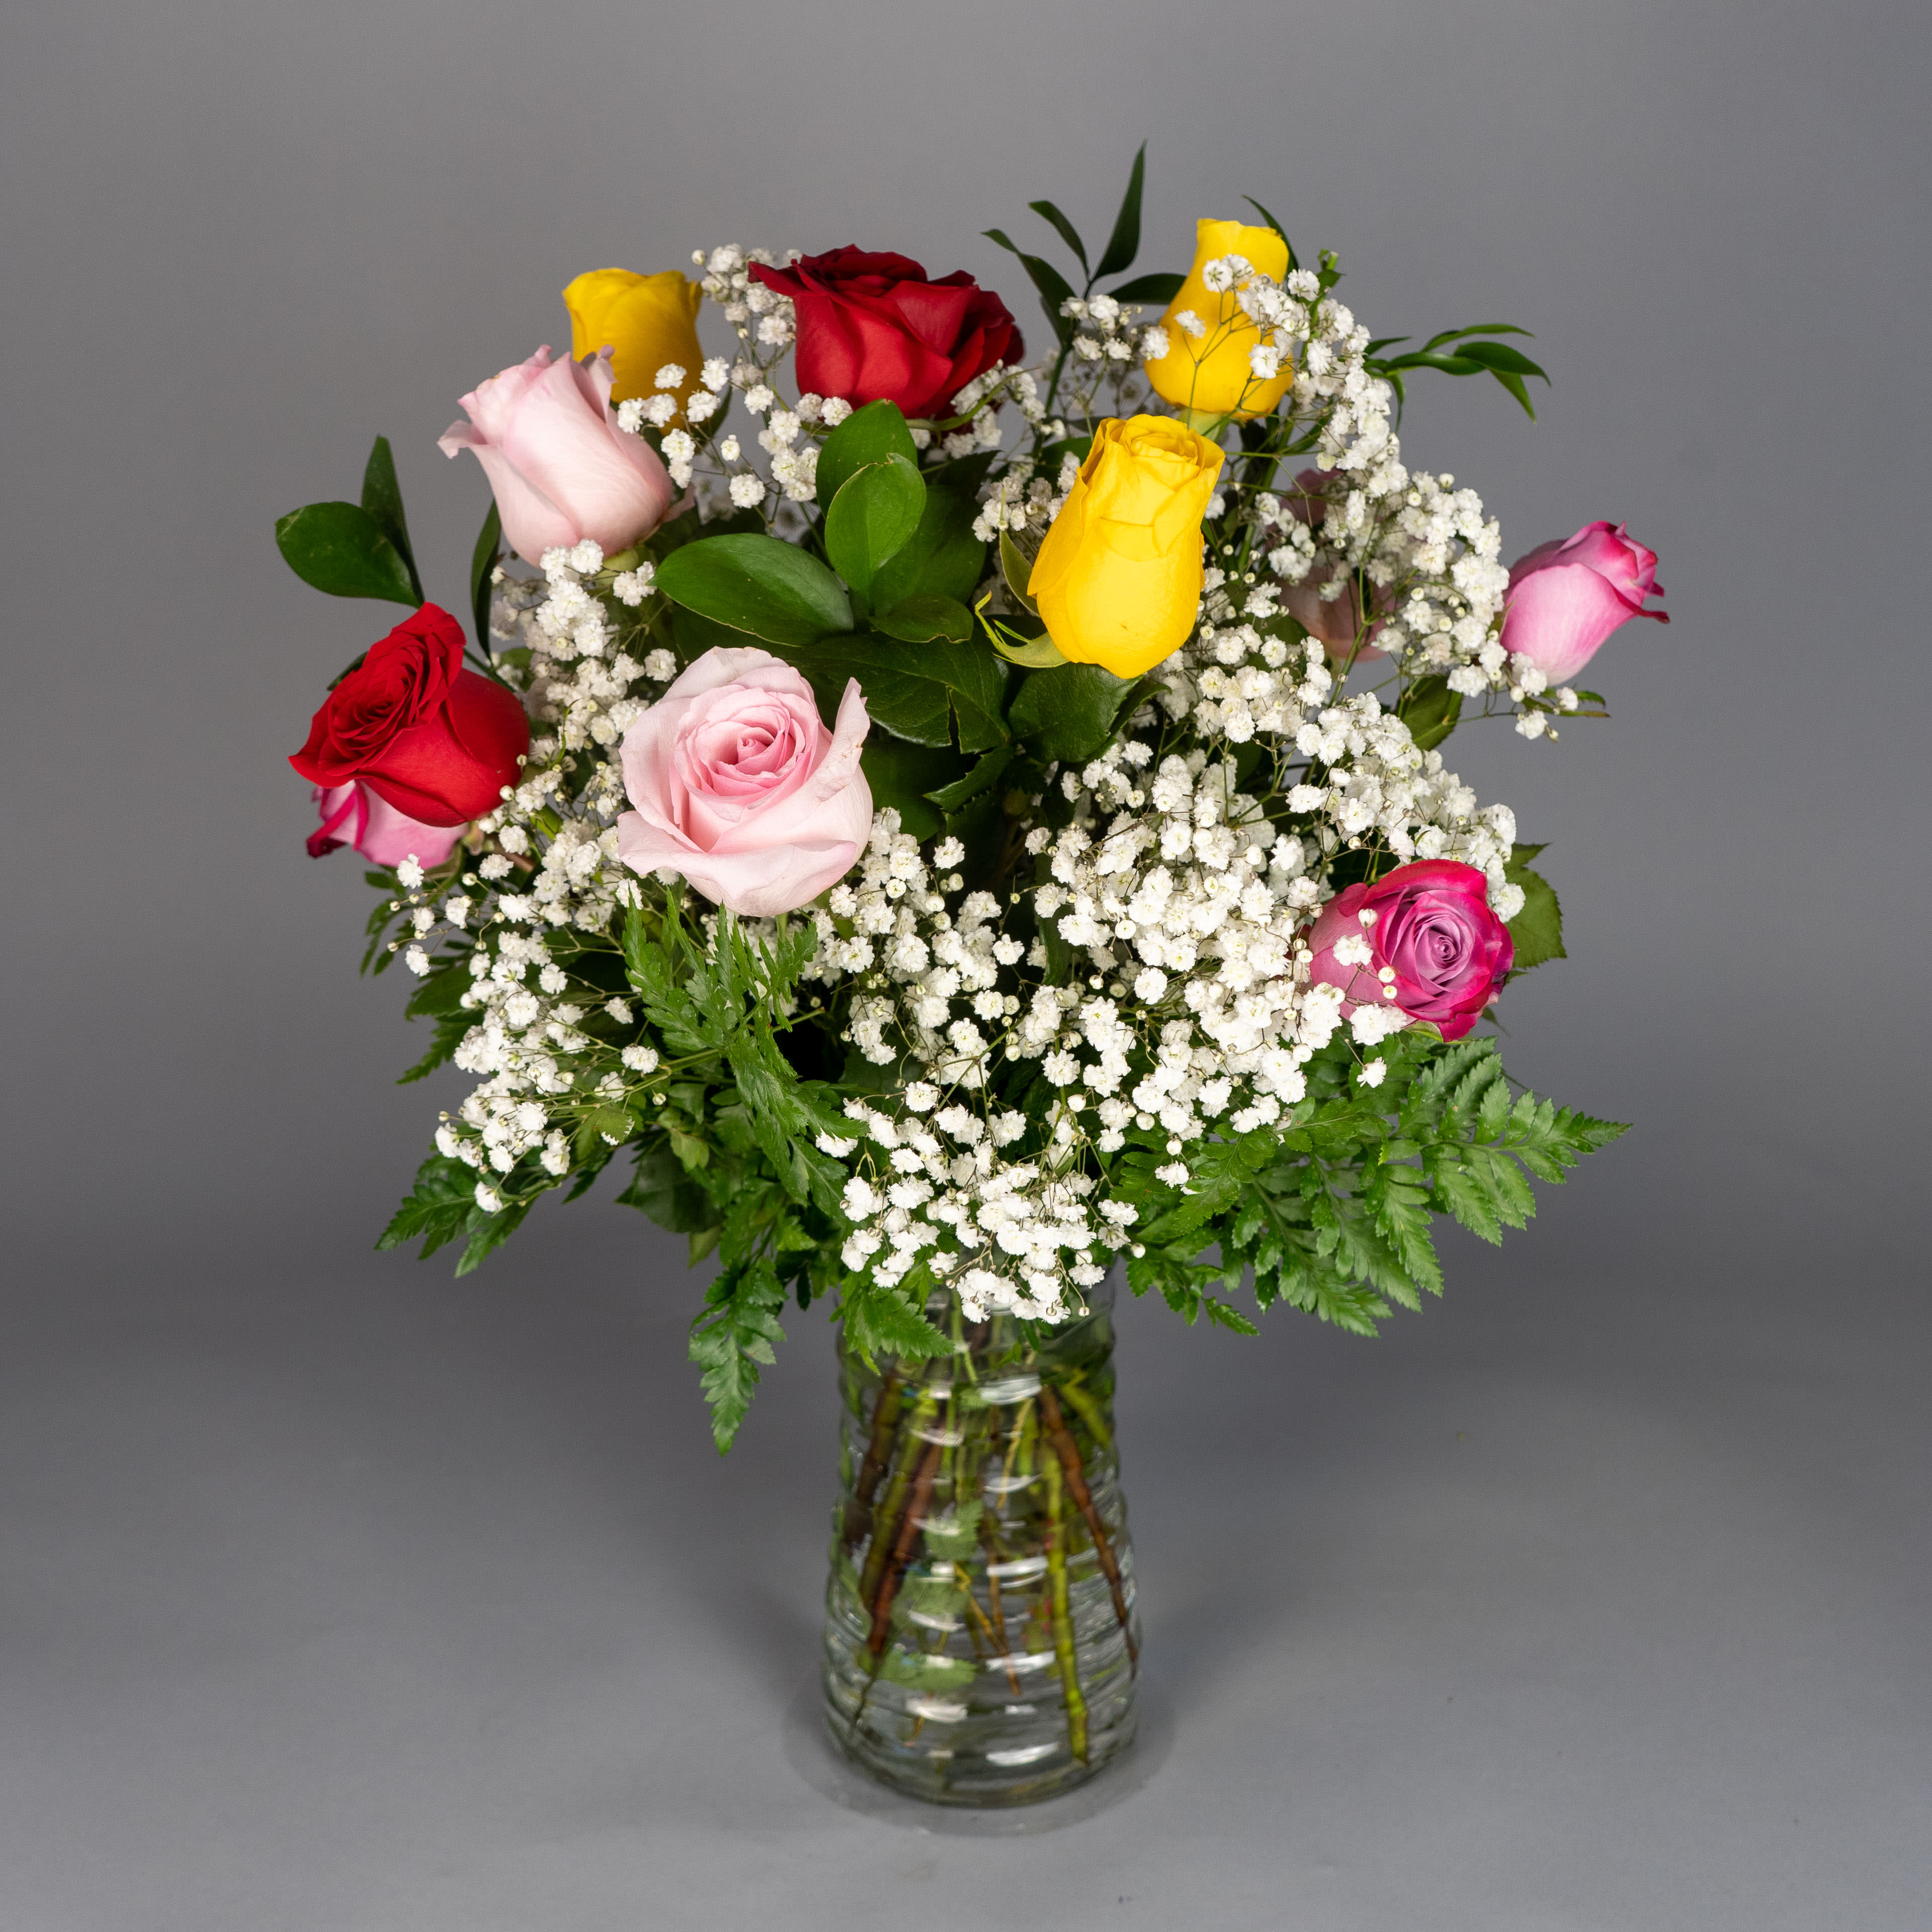 Assorted Rose Elegance - Our skilled florists handcrafted a stunning bouquet of spectacular, long-stem mixed roses that perfectly accents any event.